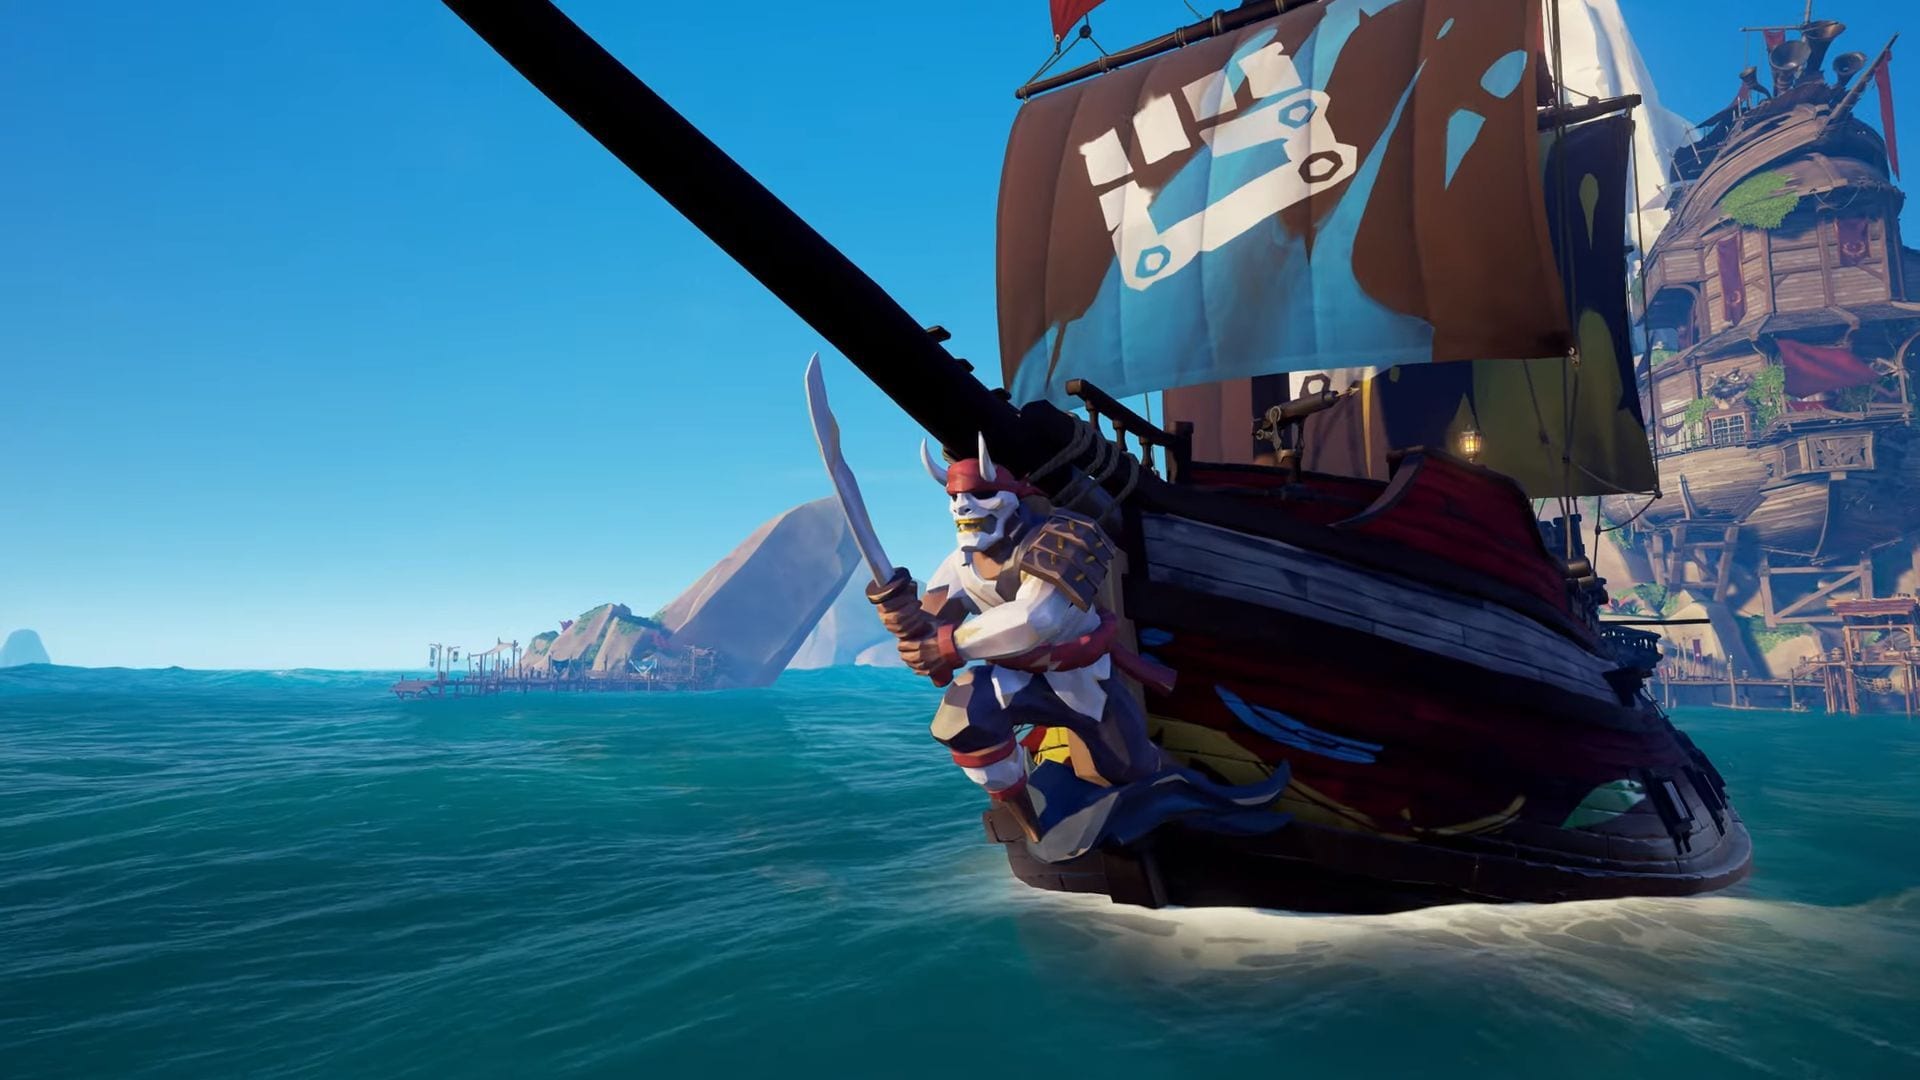 sea-of-thieves-getting-free-mutinous-fist-ship-set-inspired-by